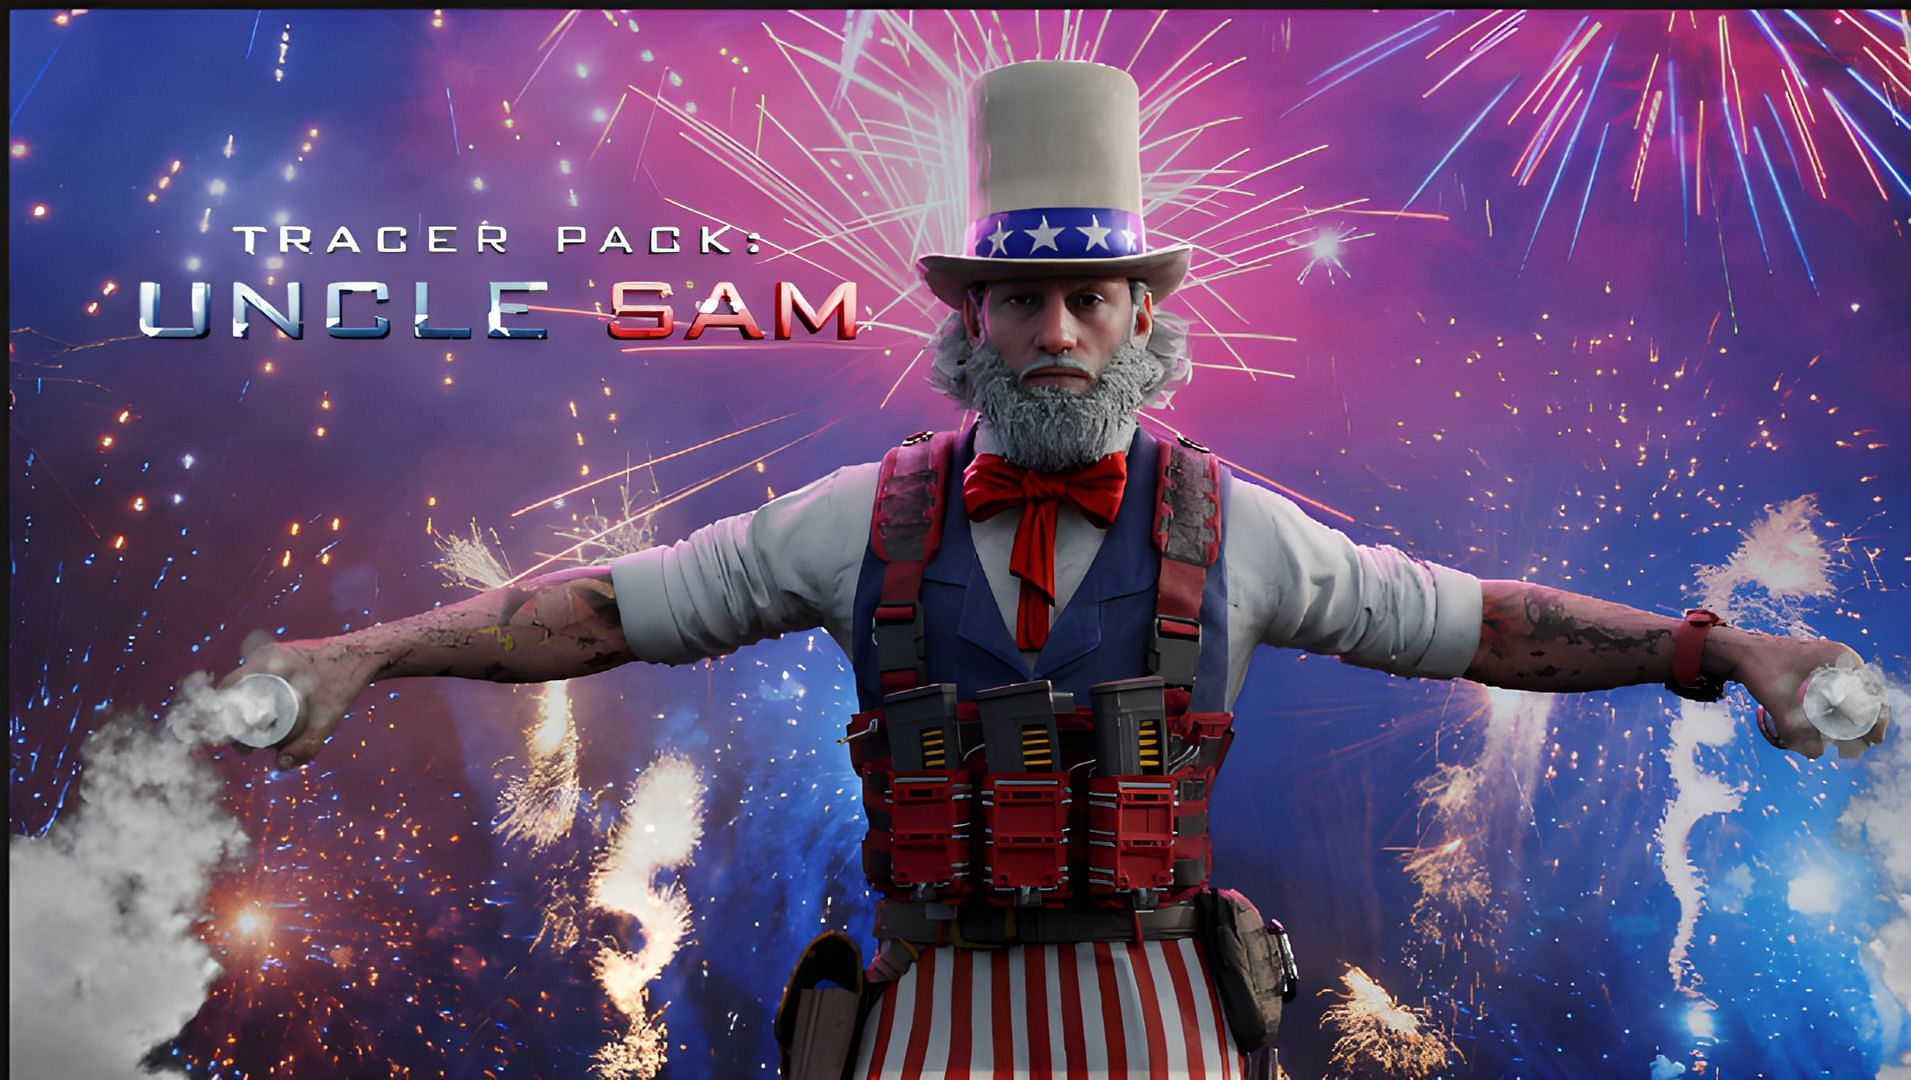 Unlce Sam Tracer Pack is available in MW3 and Warzone, Uncle Sam Tracer Pack